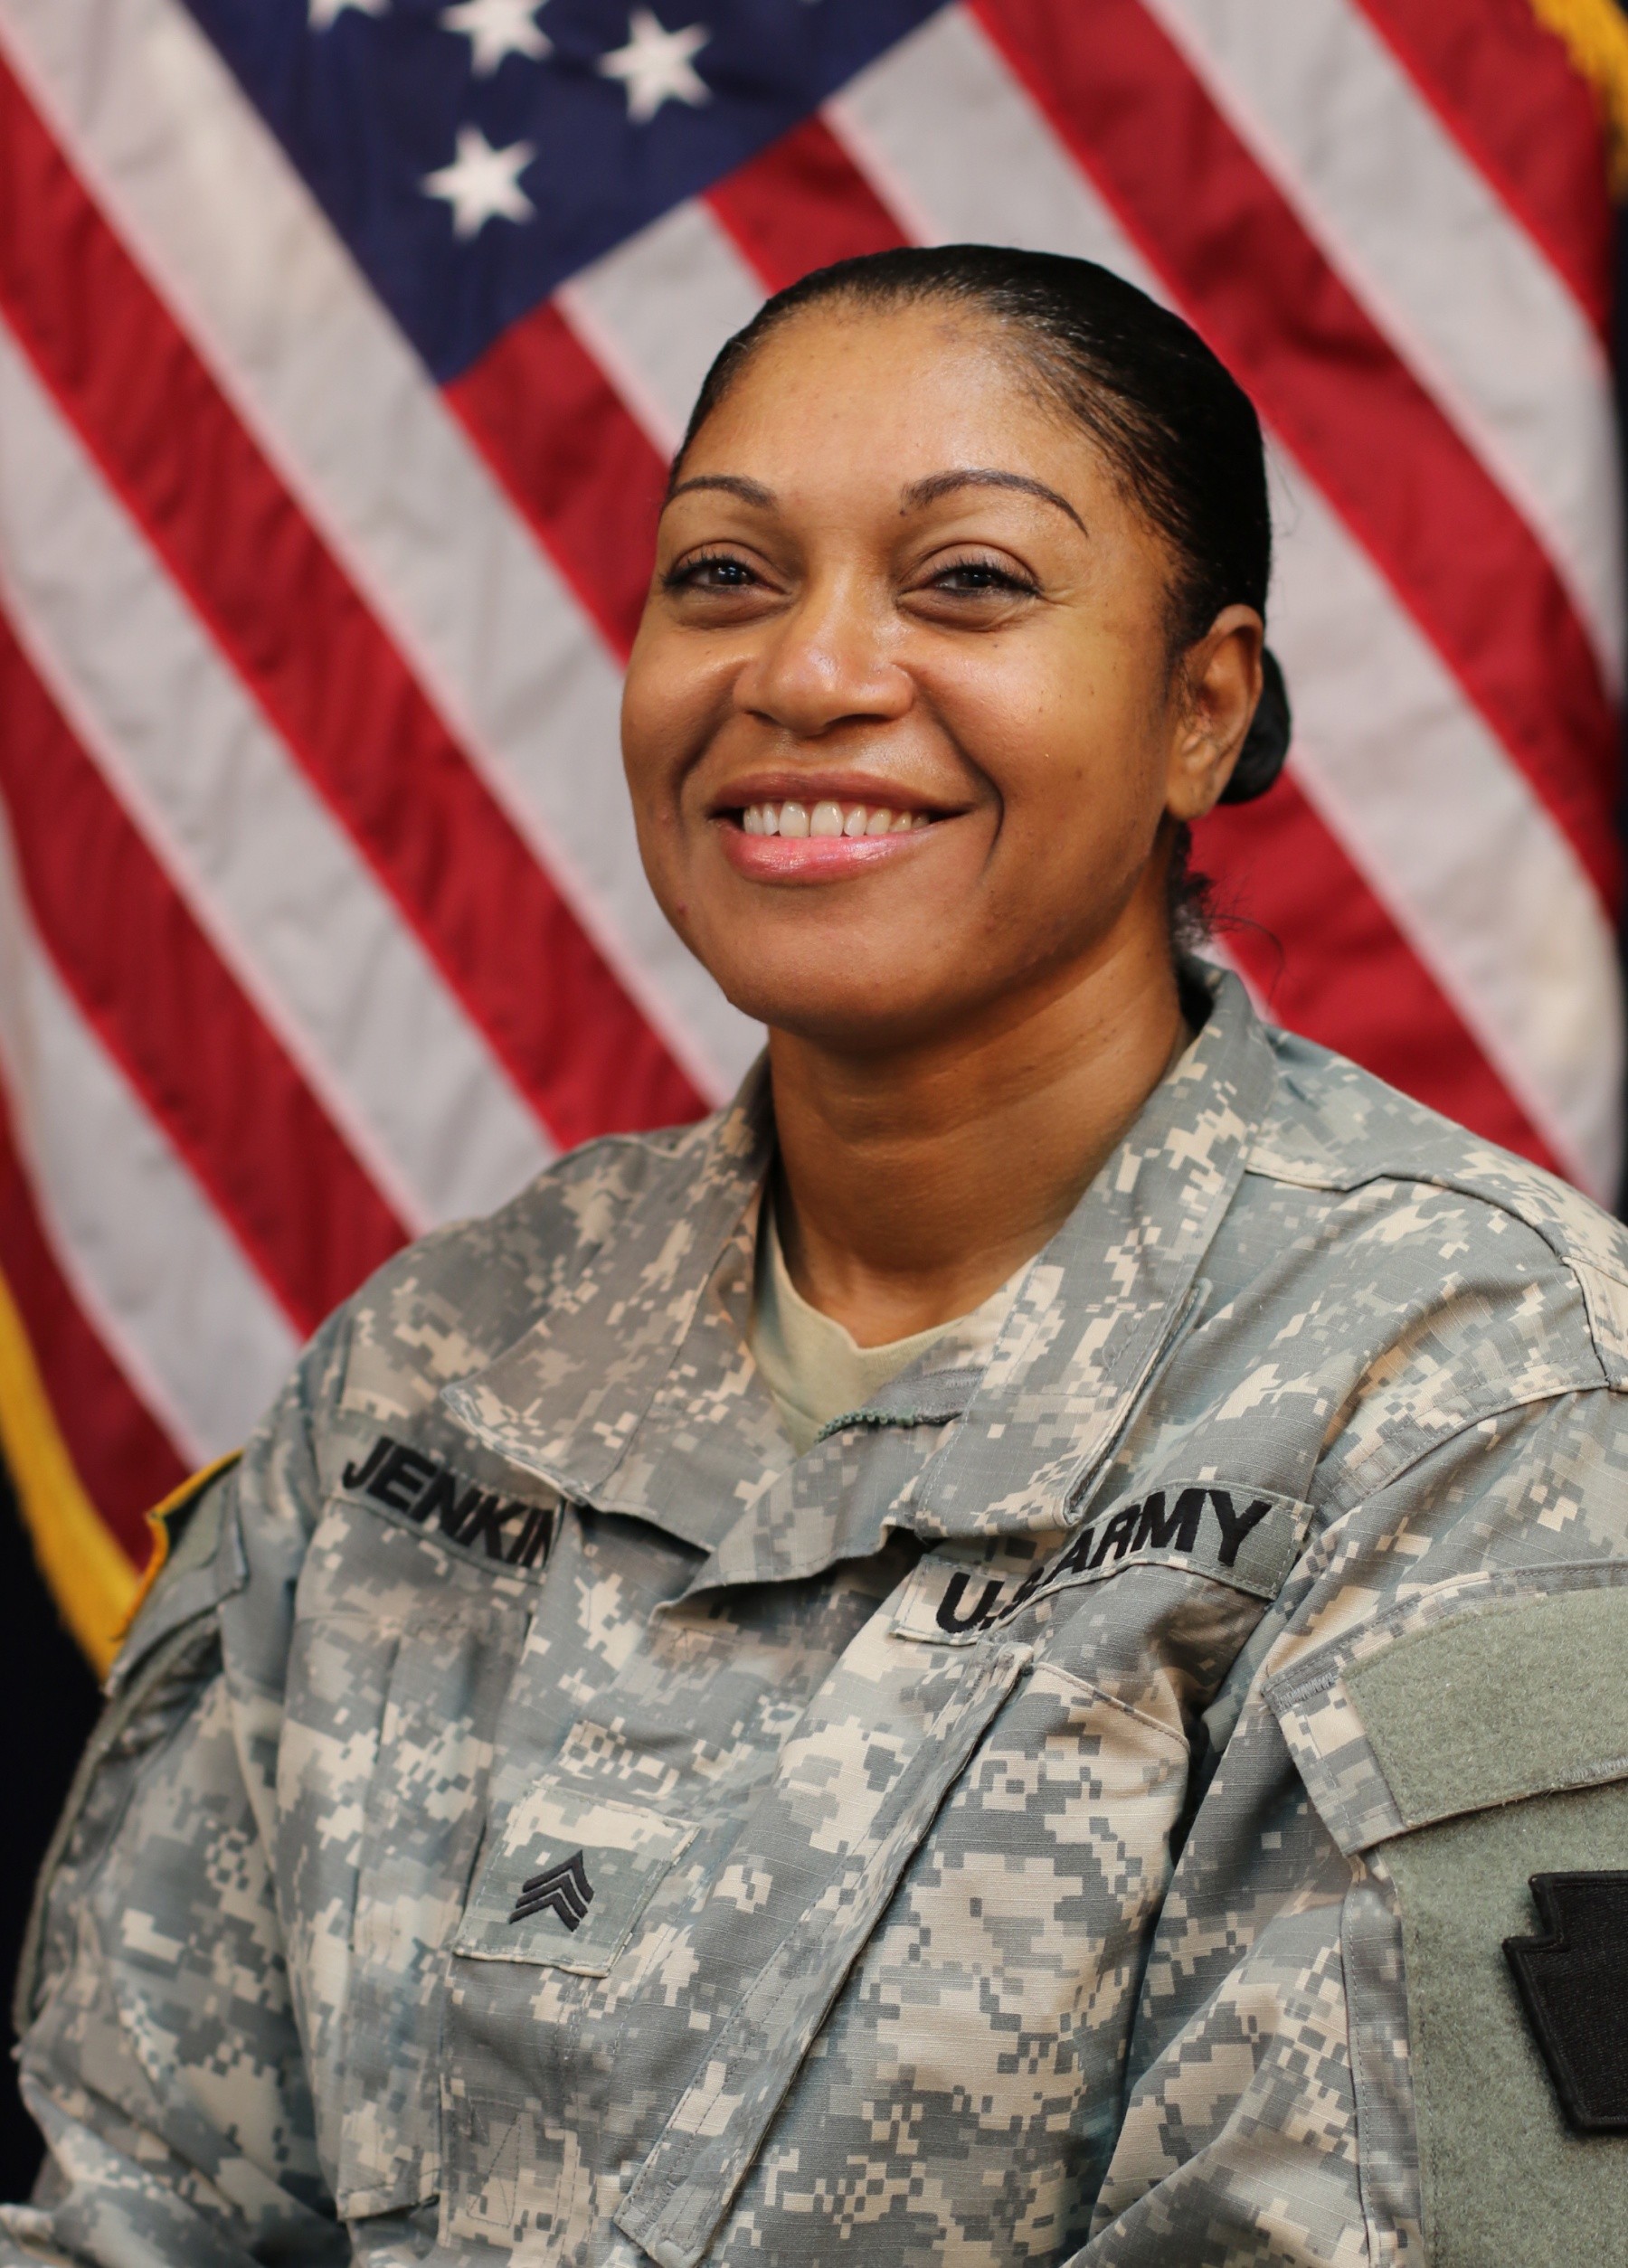 Citizen Soldier helps pave the way for gender equality | Article | The  United States Army